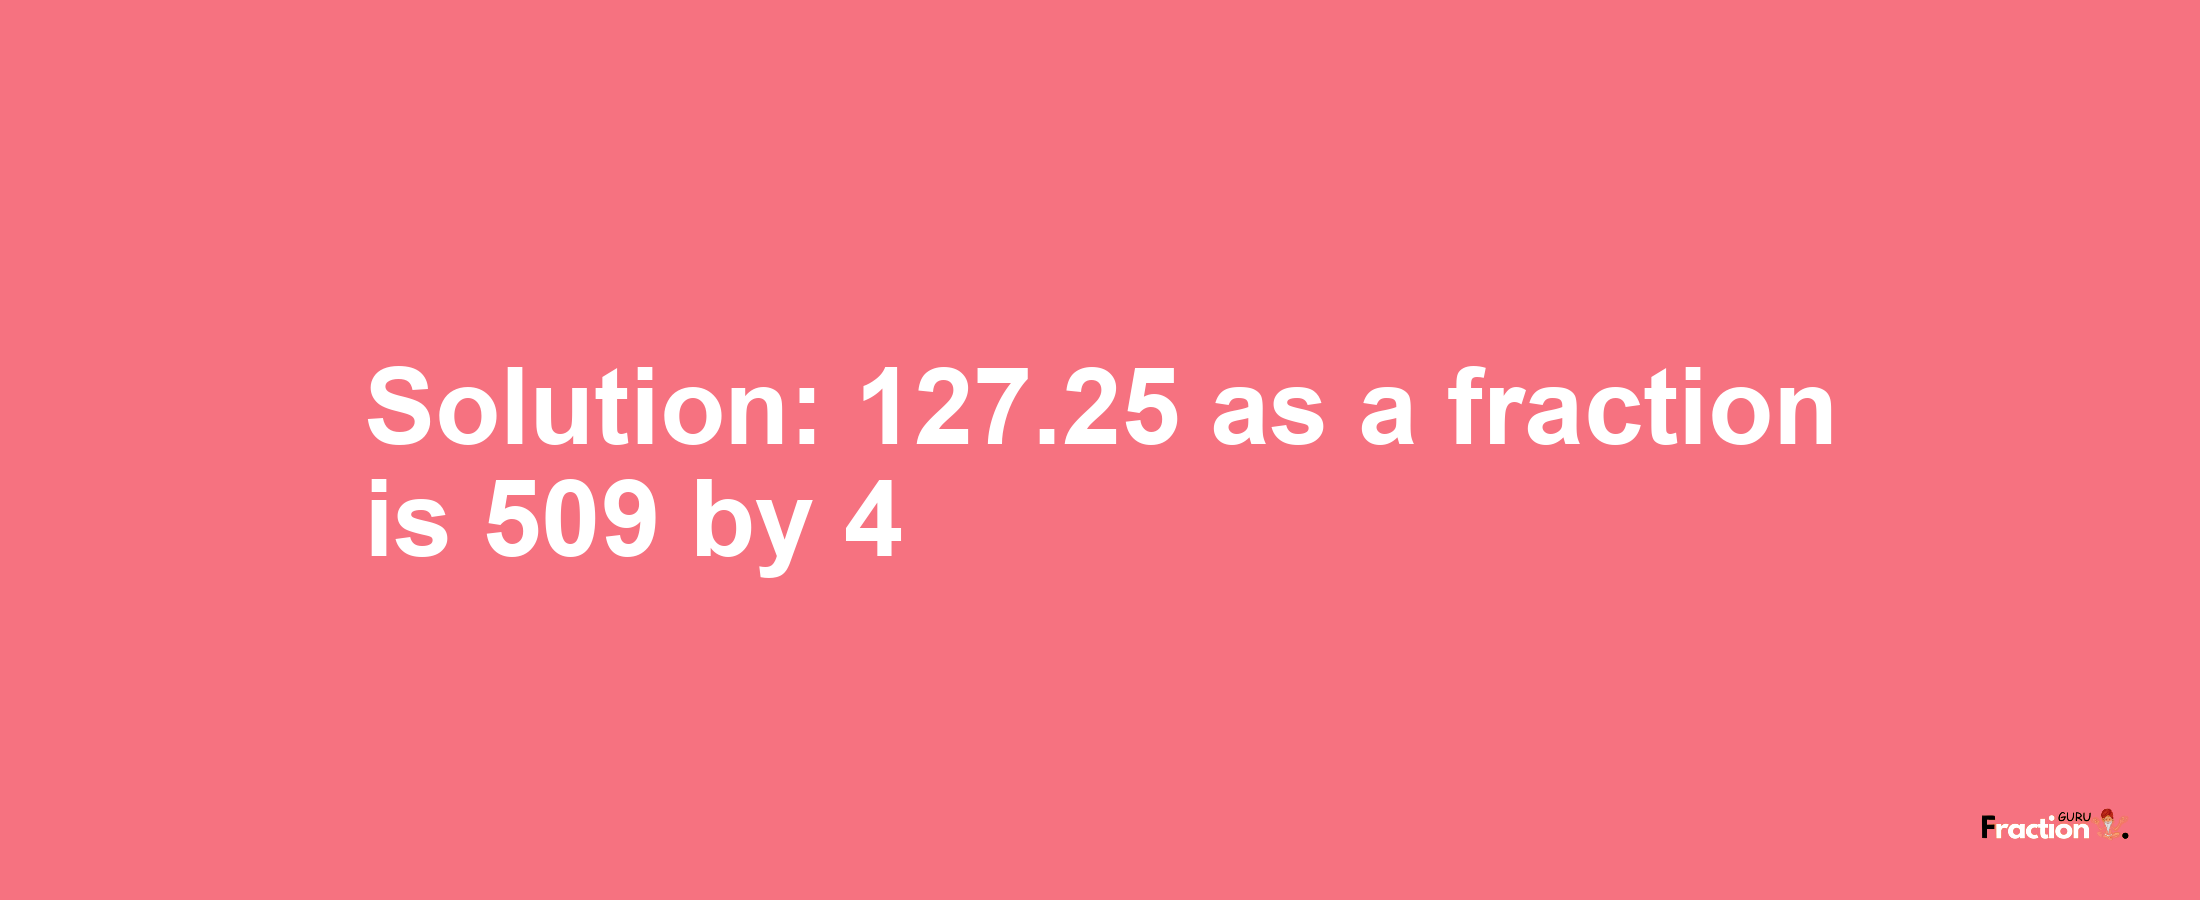 Solution:127.25 as a fraction is 509/4